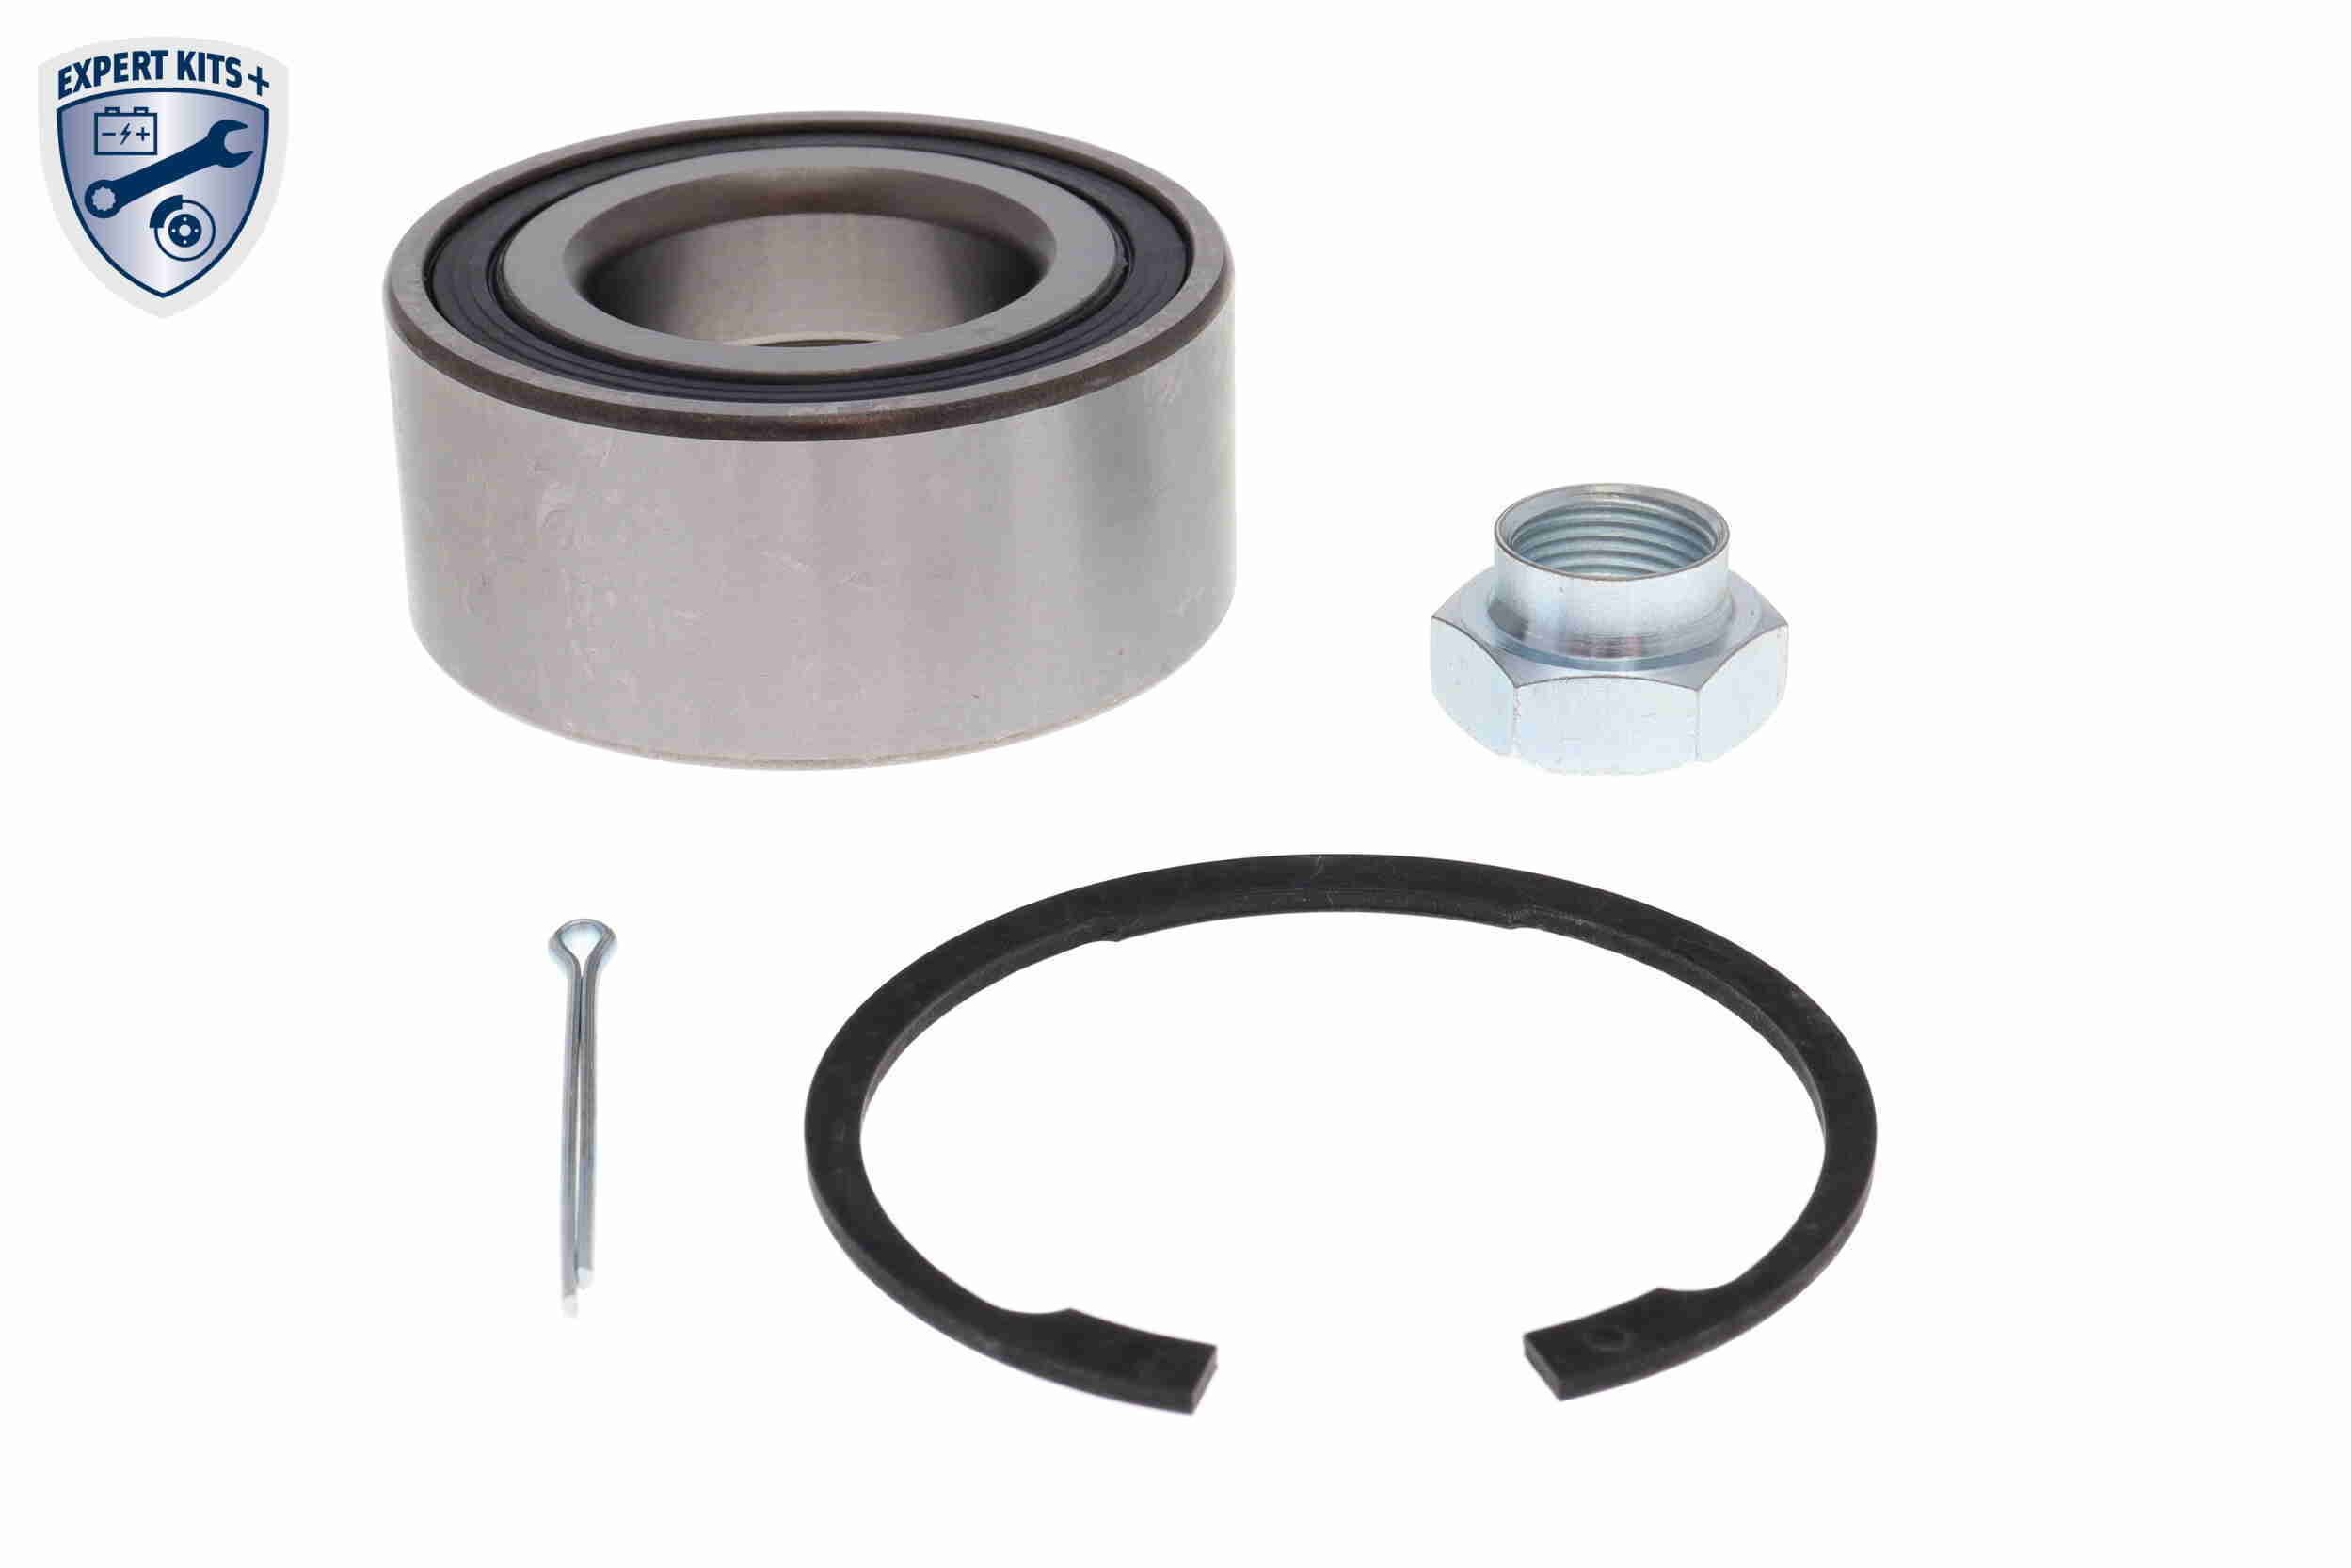 VAICO V42-0058 Wheel bearing kit Front Axle Left, Front Axle Right, EXPERT KITS +, with retaining ring, 82 mm